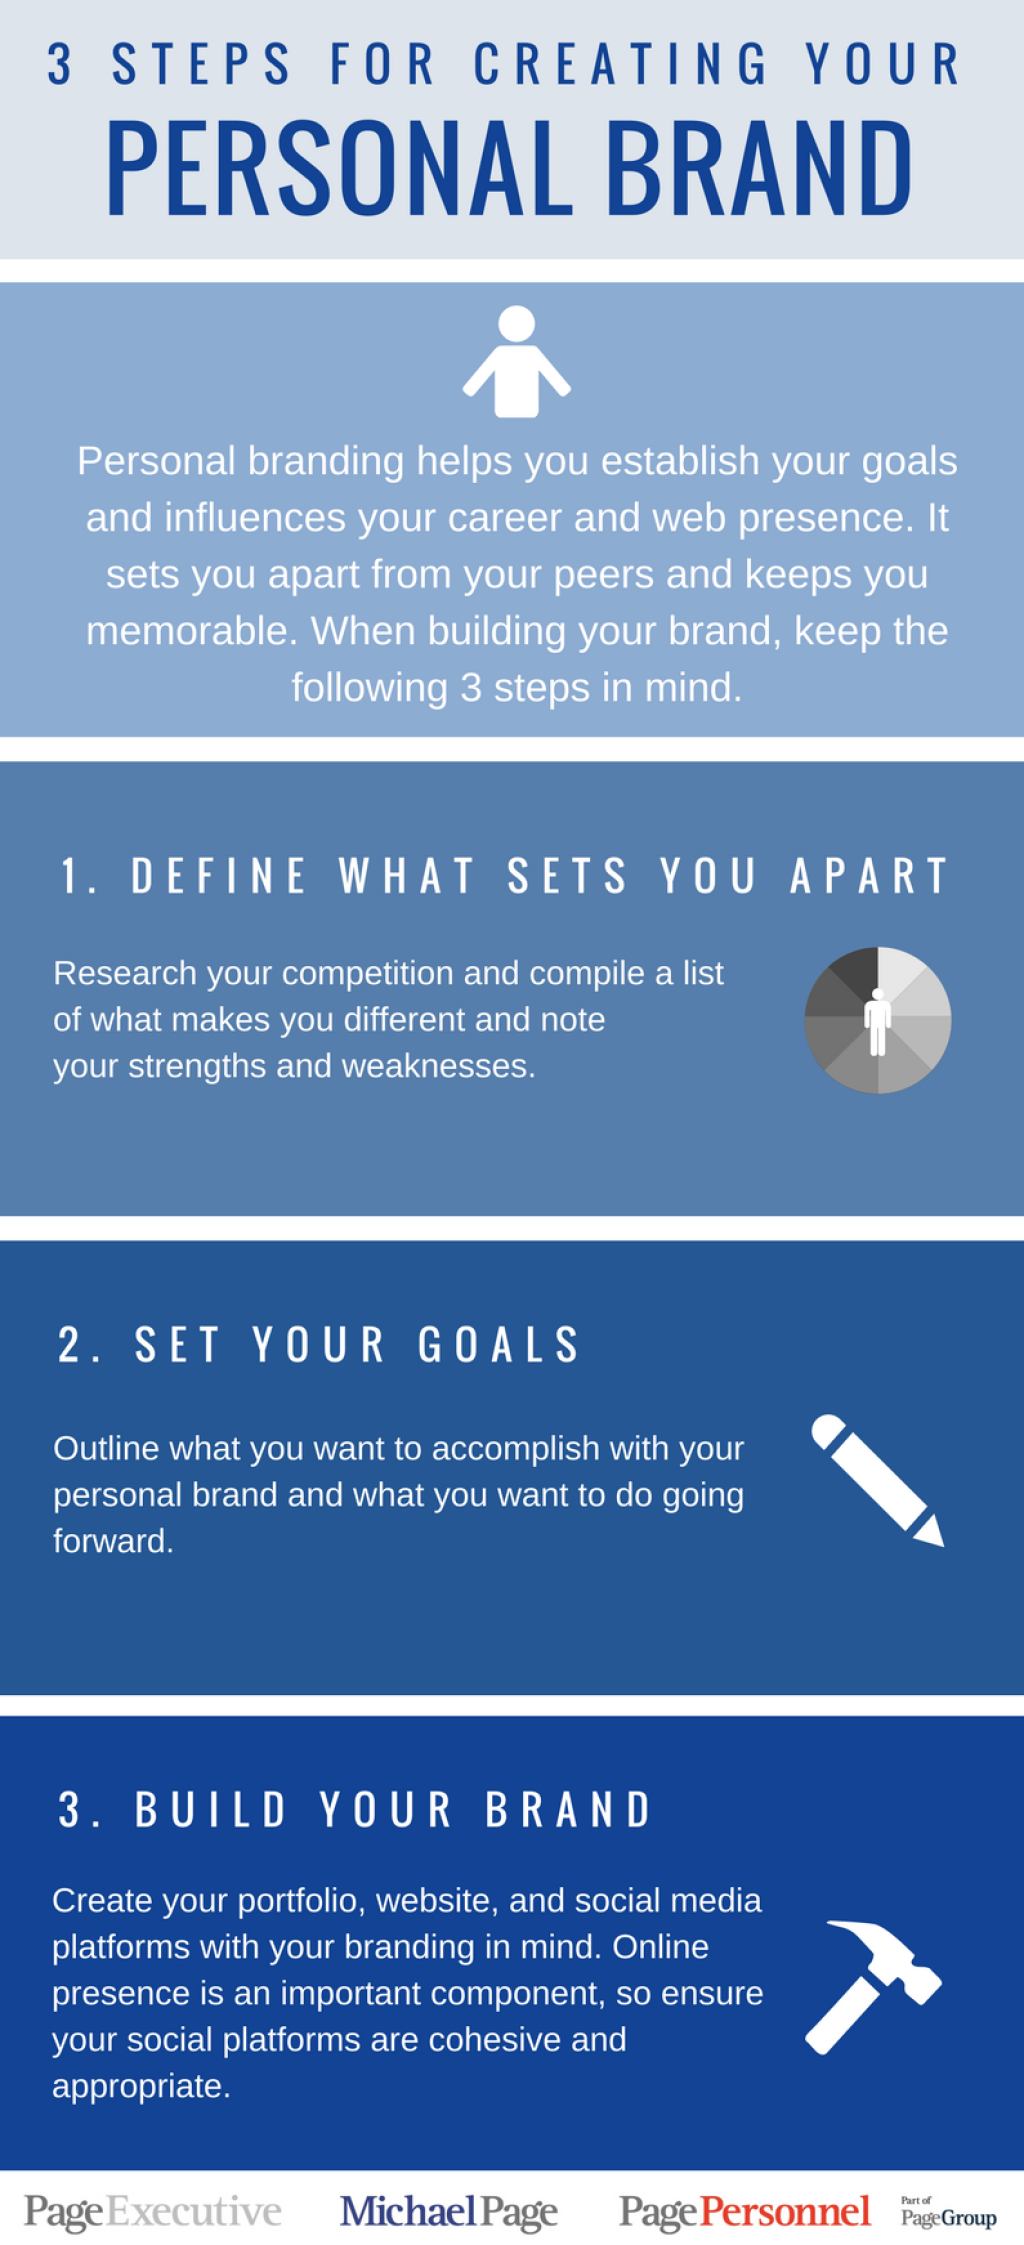 Picture of: Steps for Creating Your Personal Brand [Infographic]  Michael Page